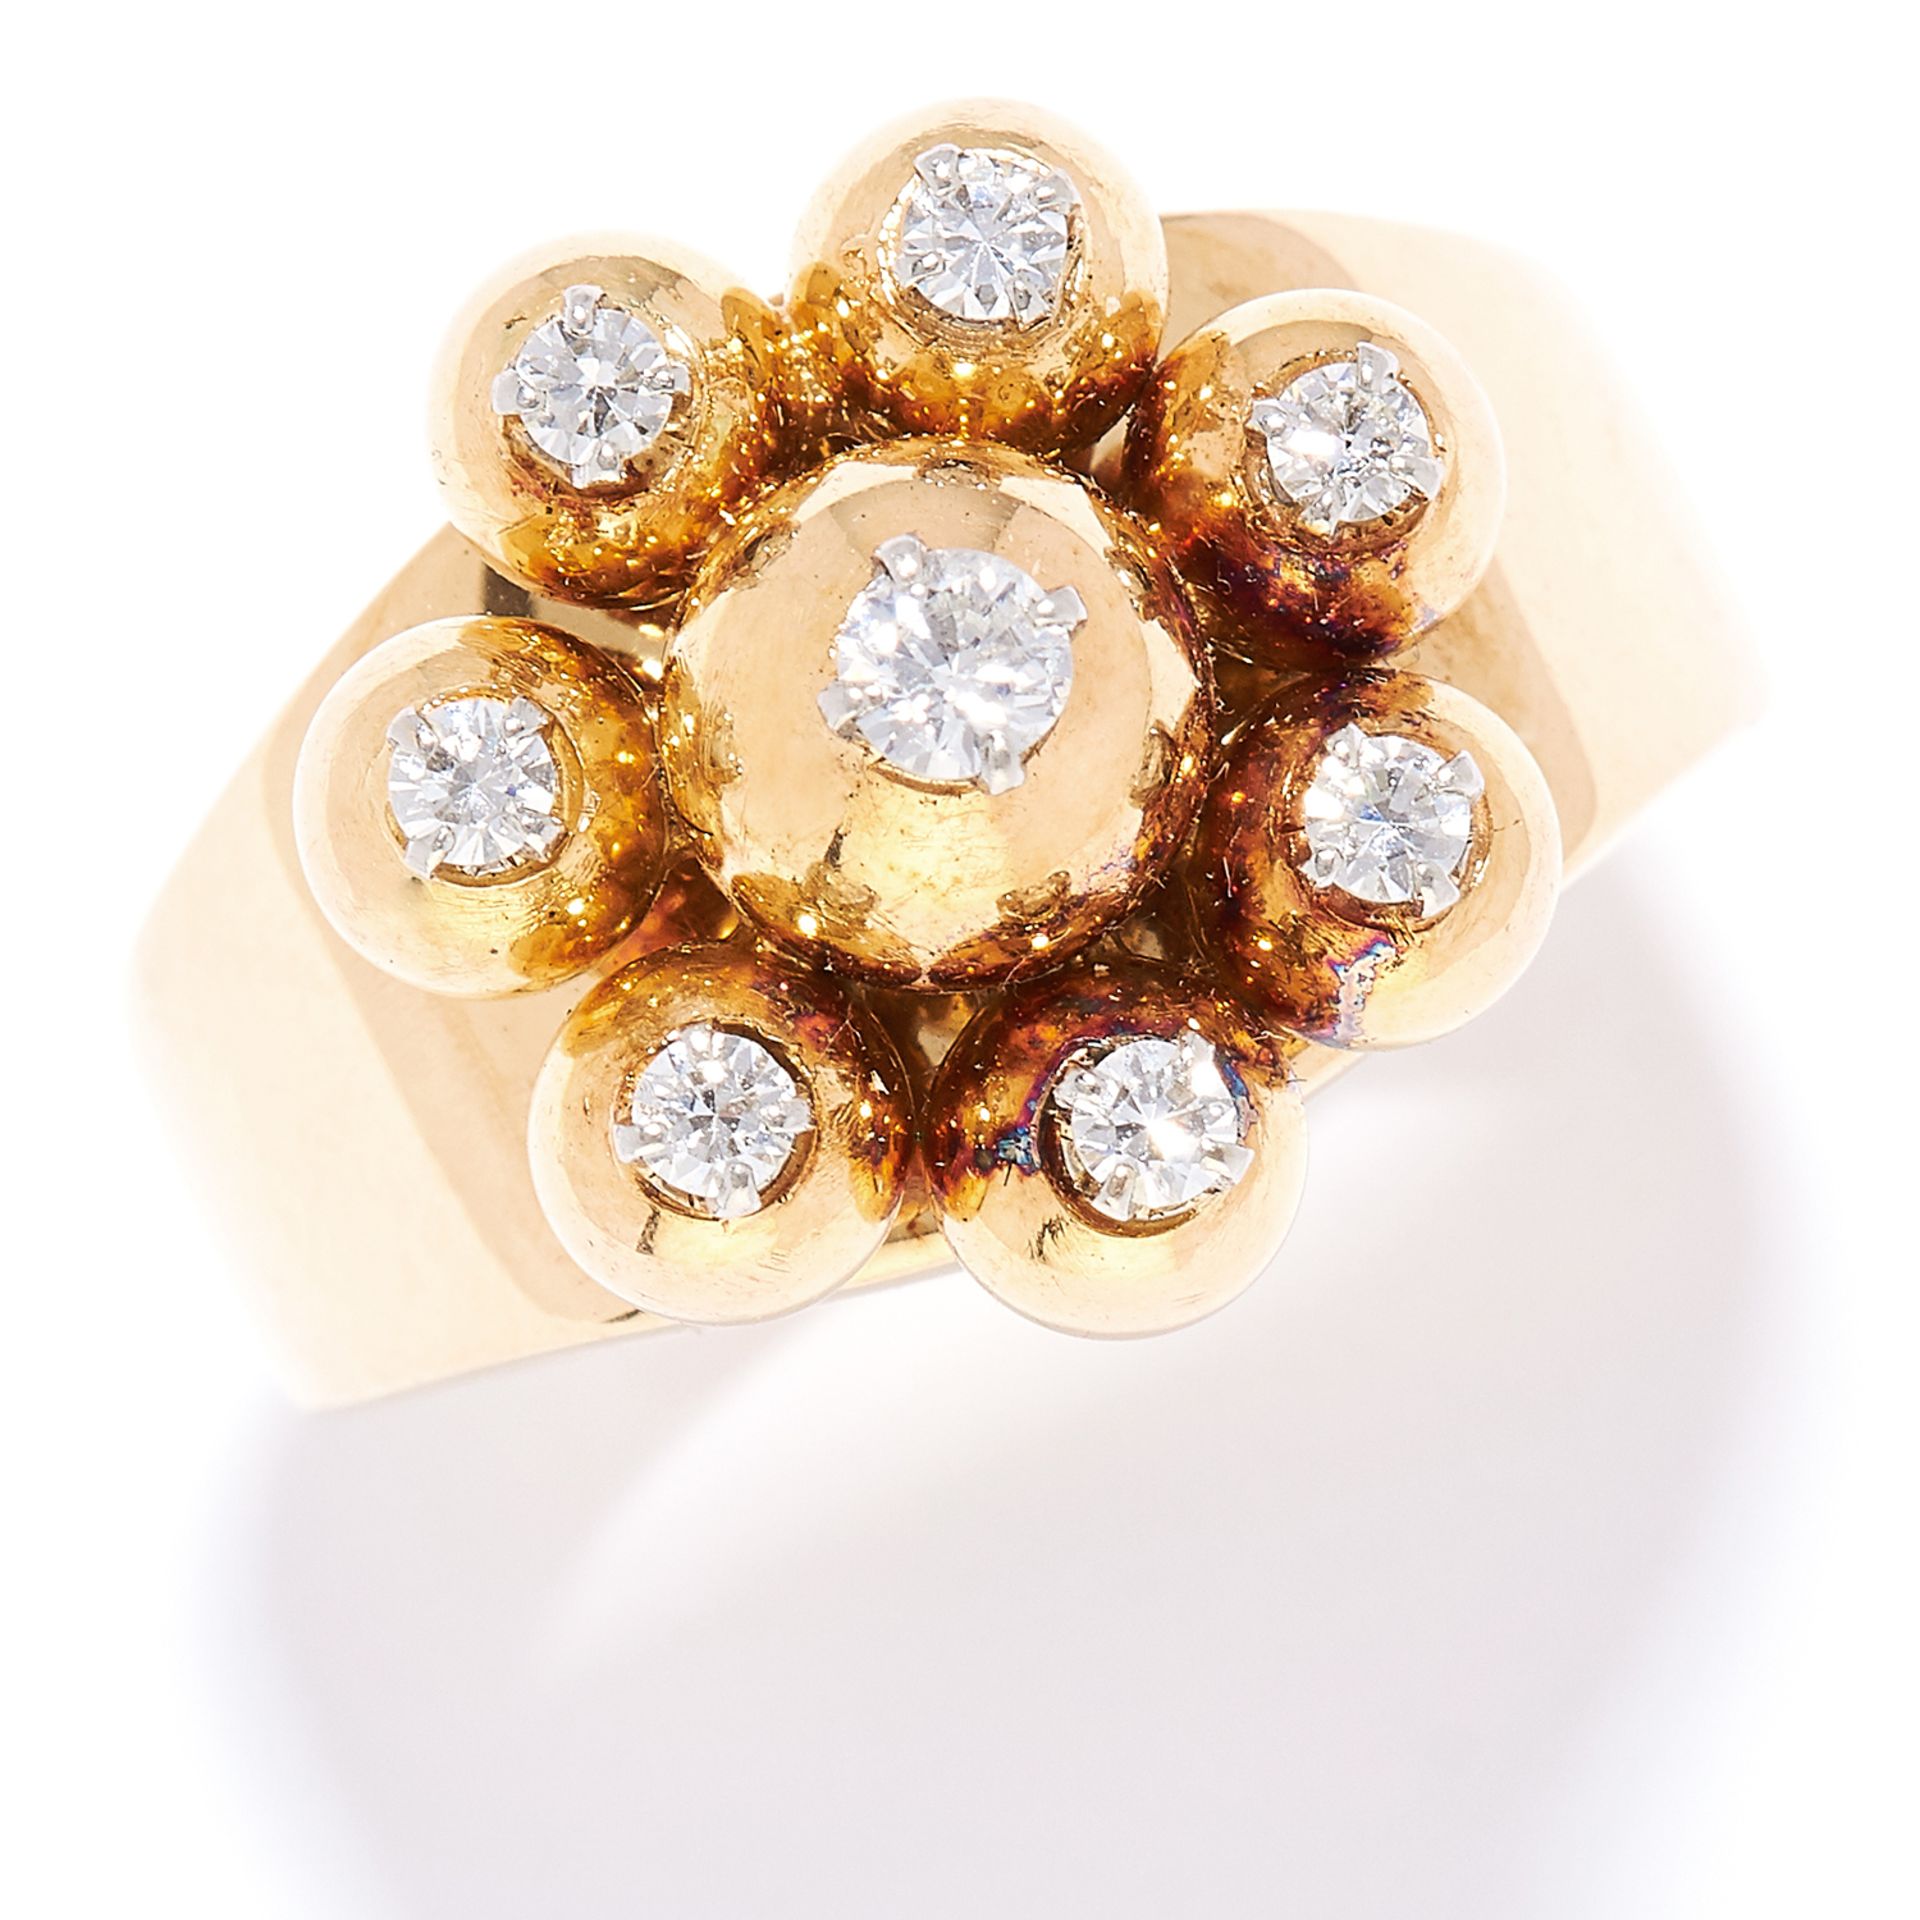 VINTAGE DIAMOND DRESS RING, CARTIER, CIRCA 1960 in 18ct yellow gold, set with round cut diamonds